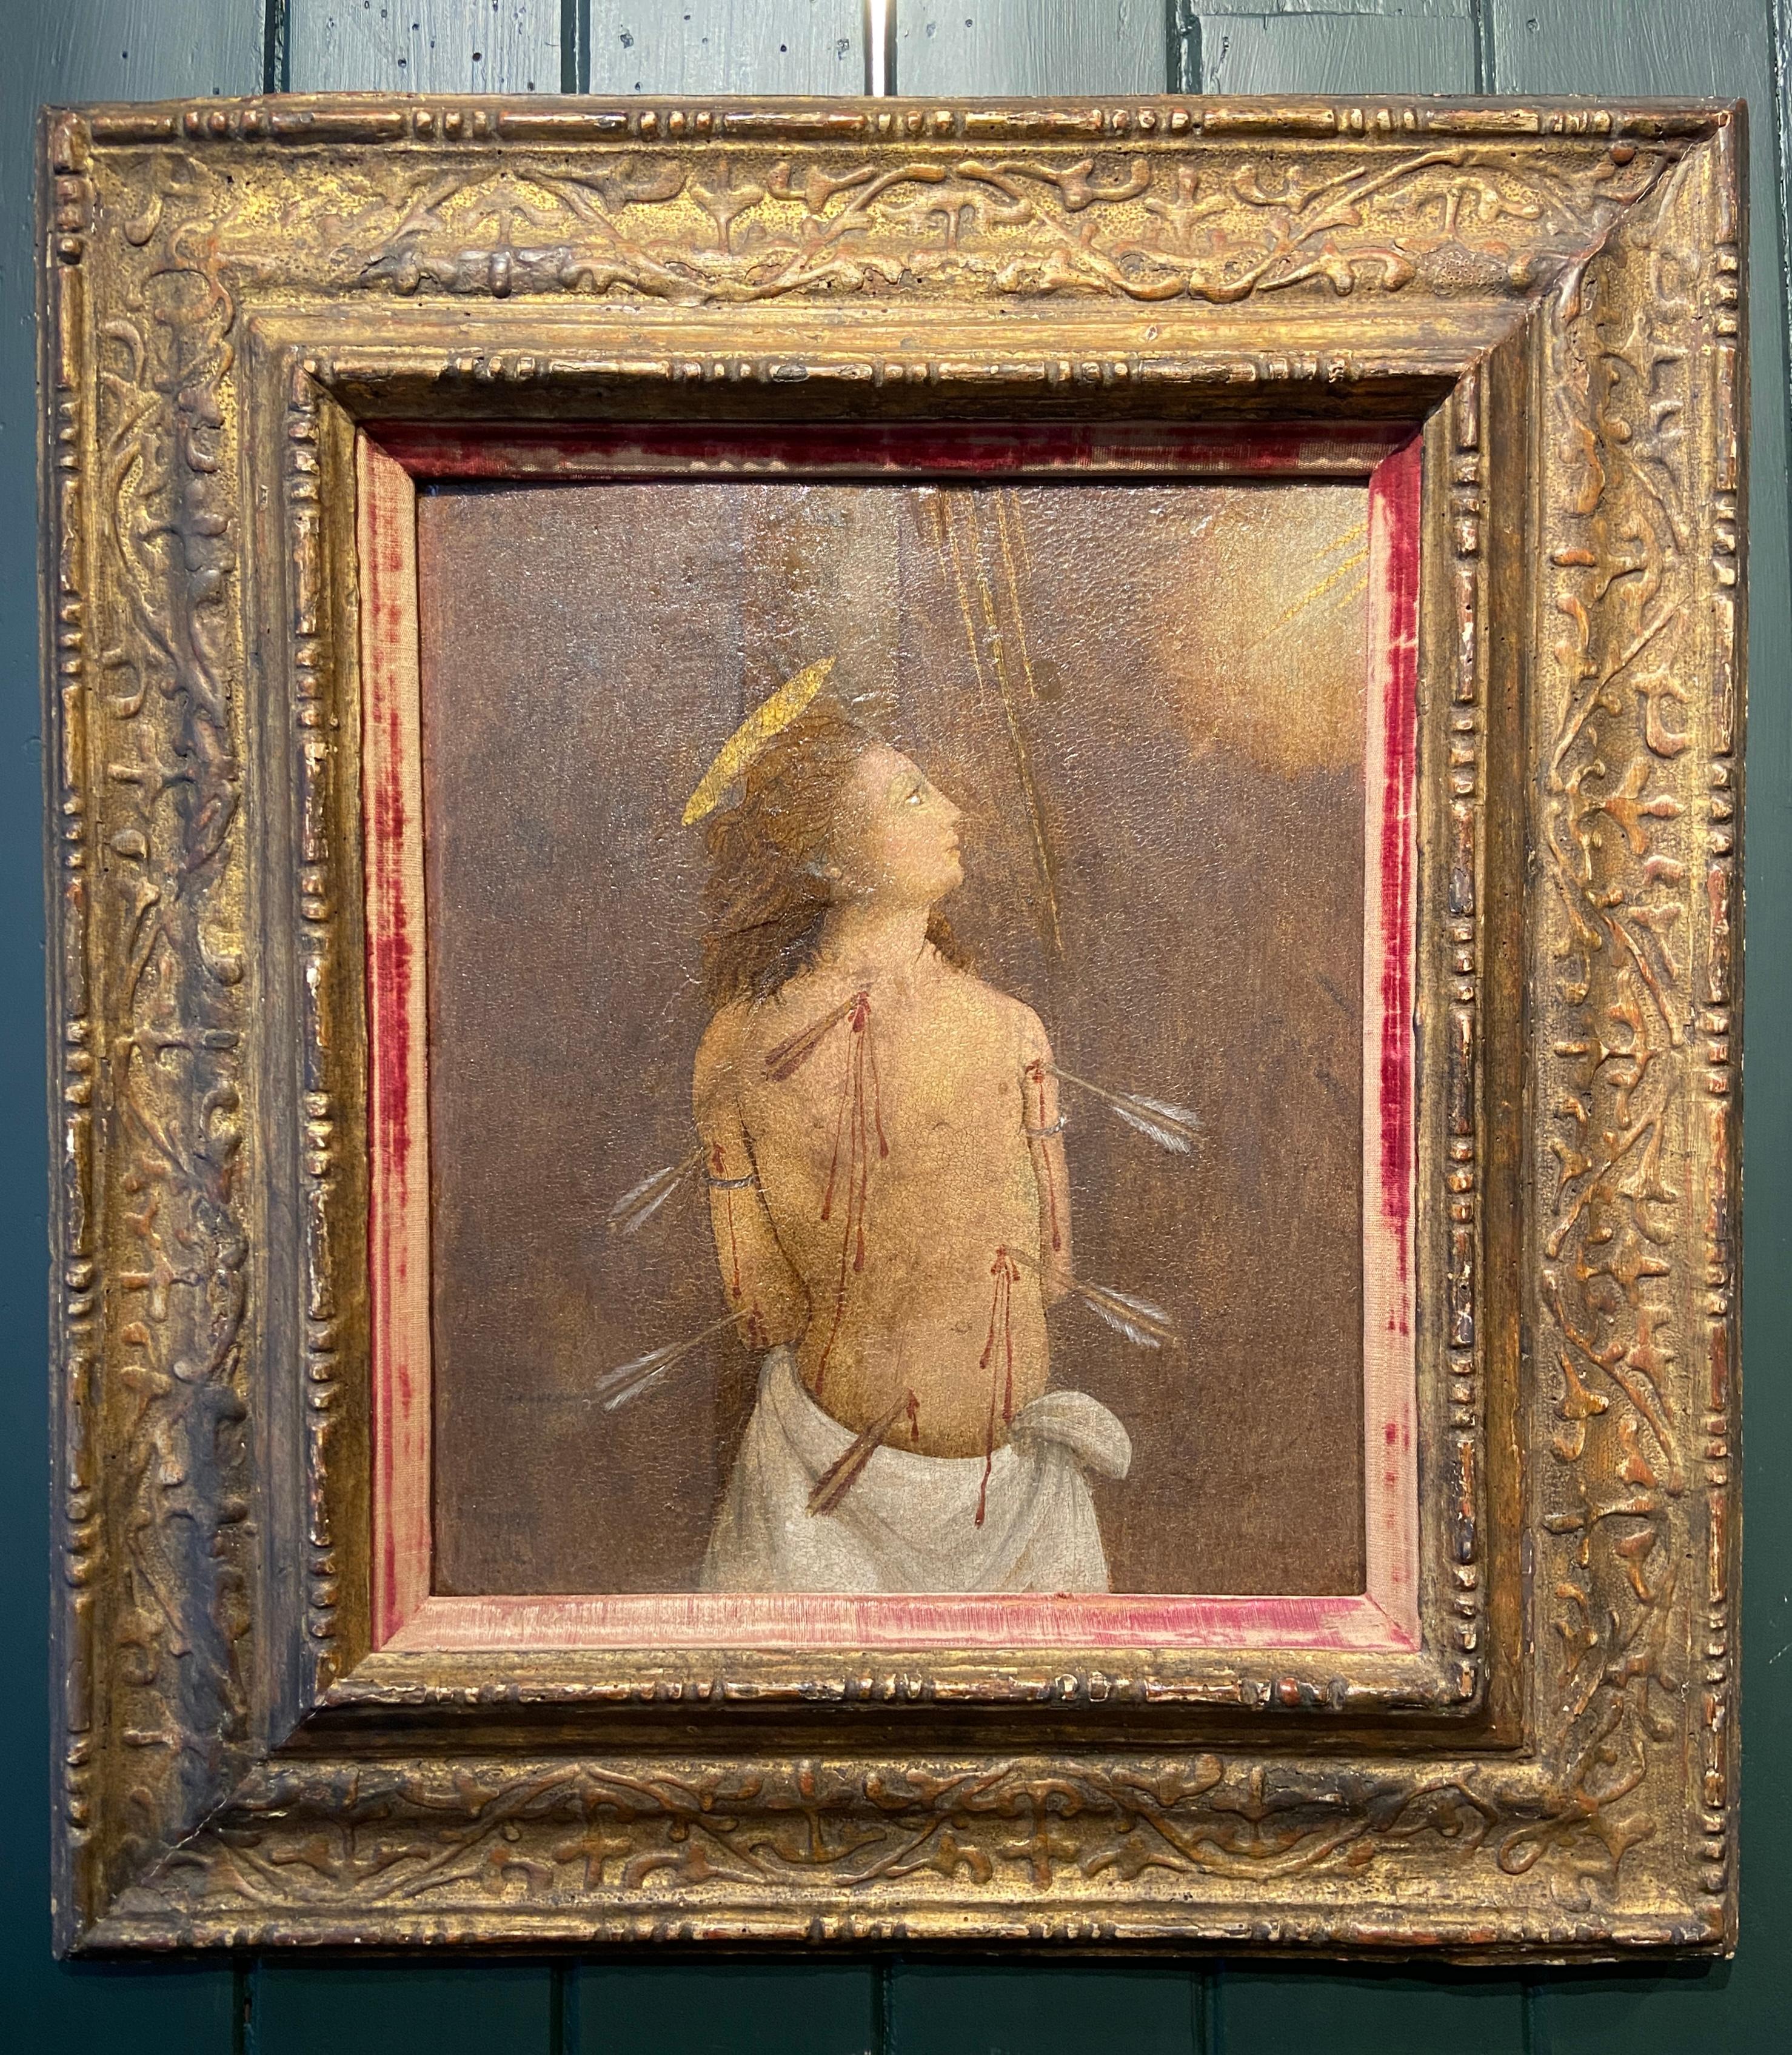 Oil on panel
Image size: 16 x 13 1/4 inches (41 x 34 cm)
Early gilt frame

Saint Sebastian was a Roman centurion who converted to Christianity and, in punishment, the Roman Emperor Diocletian ordered Sebastian’s fellow soldiers to tie him to a post